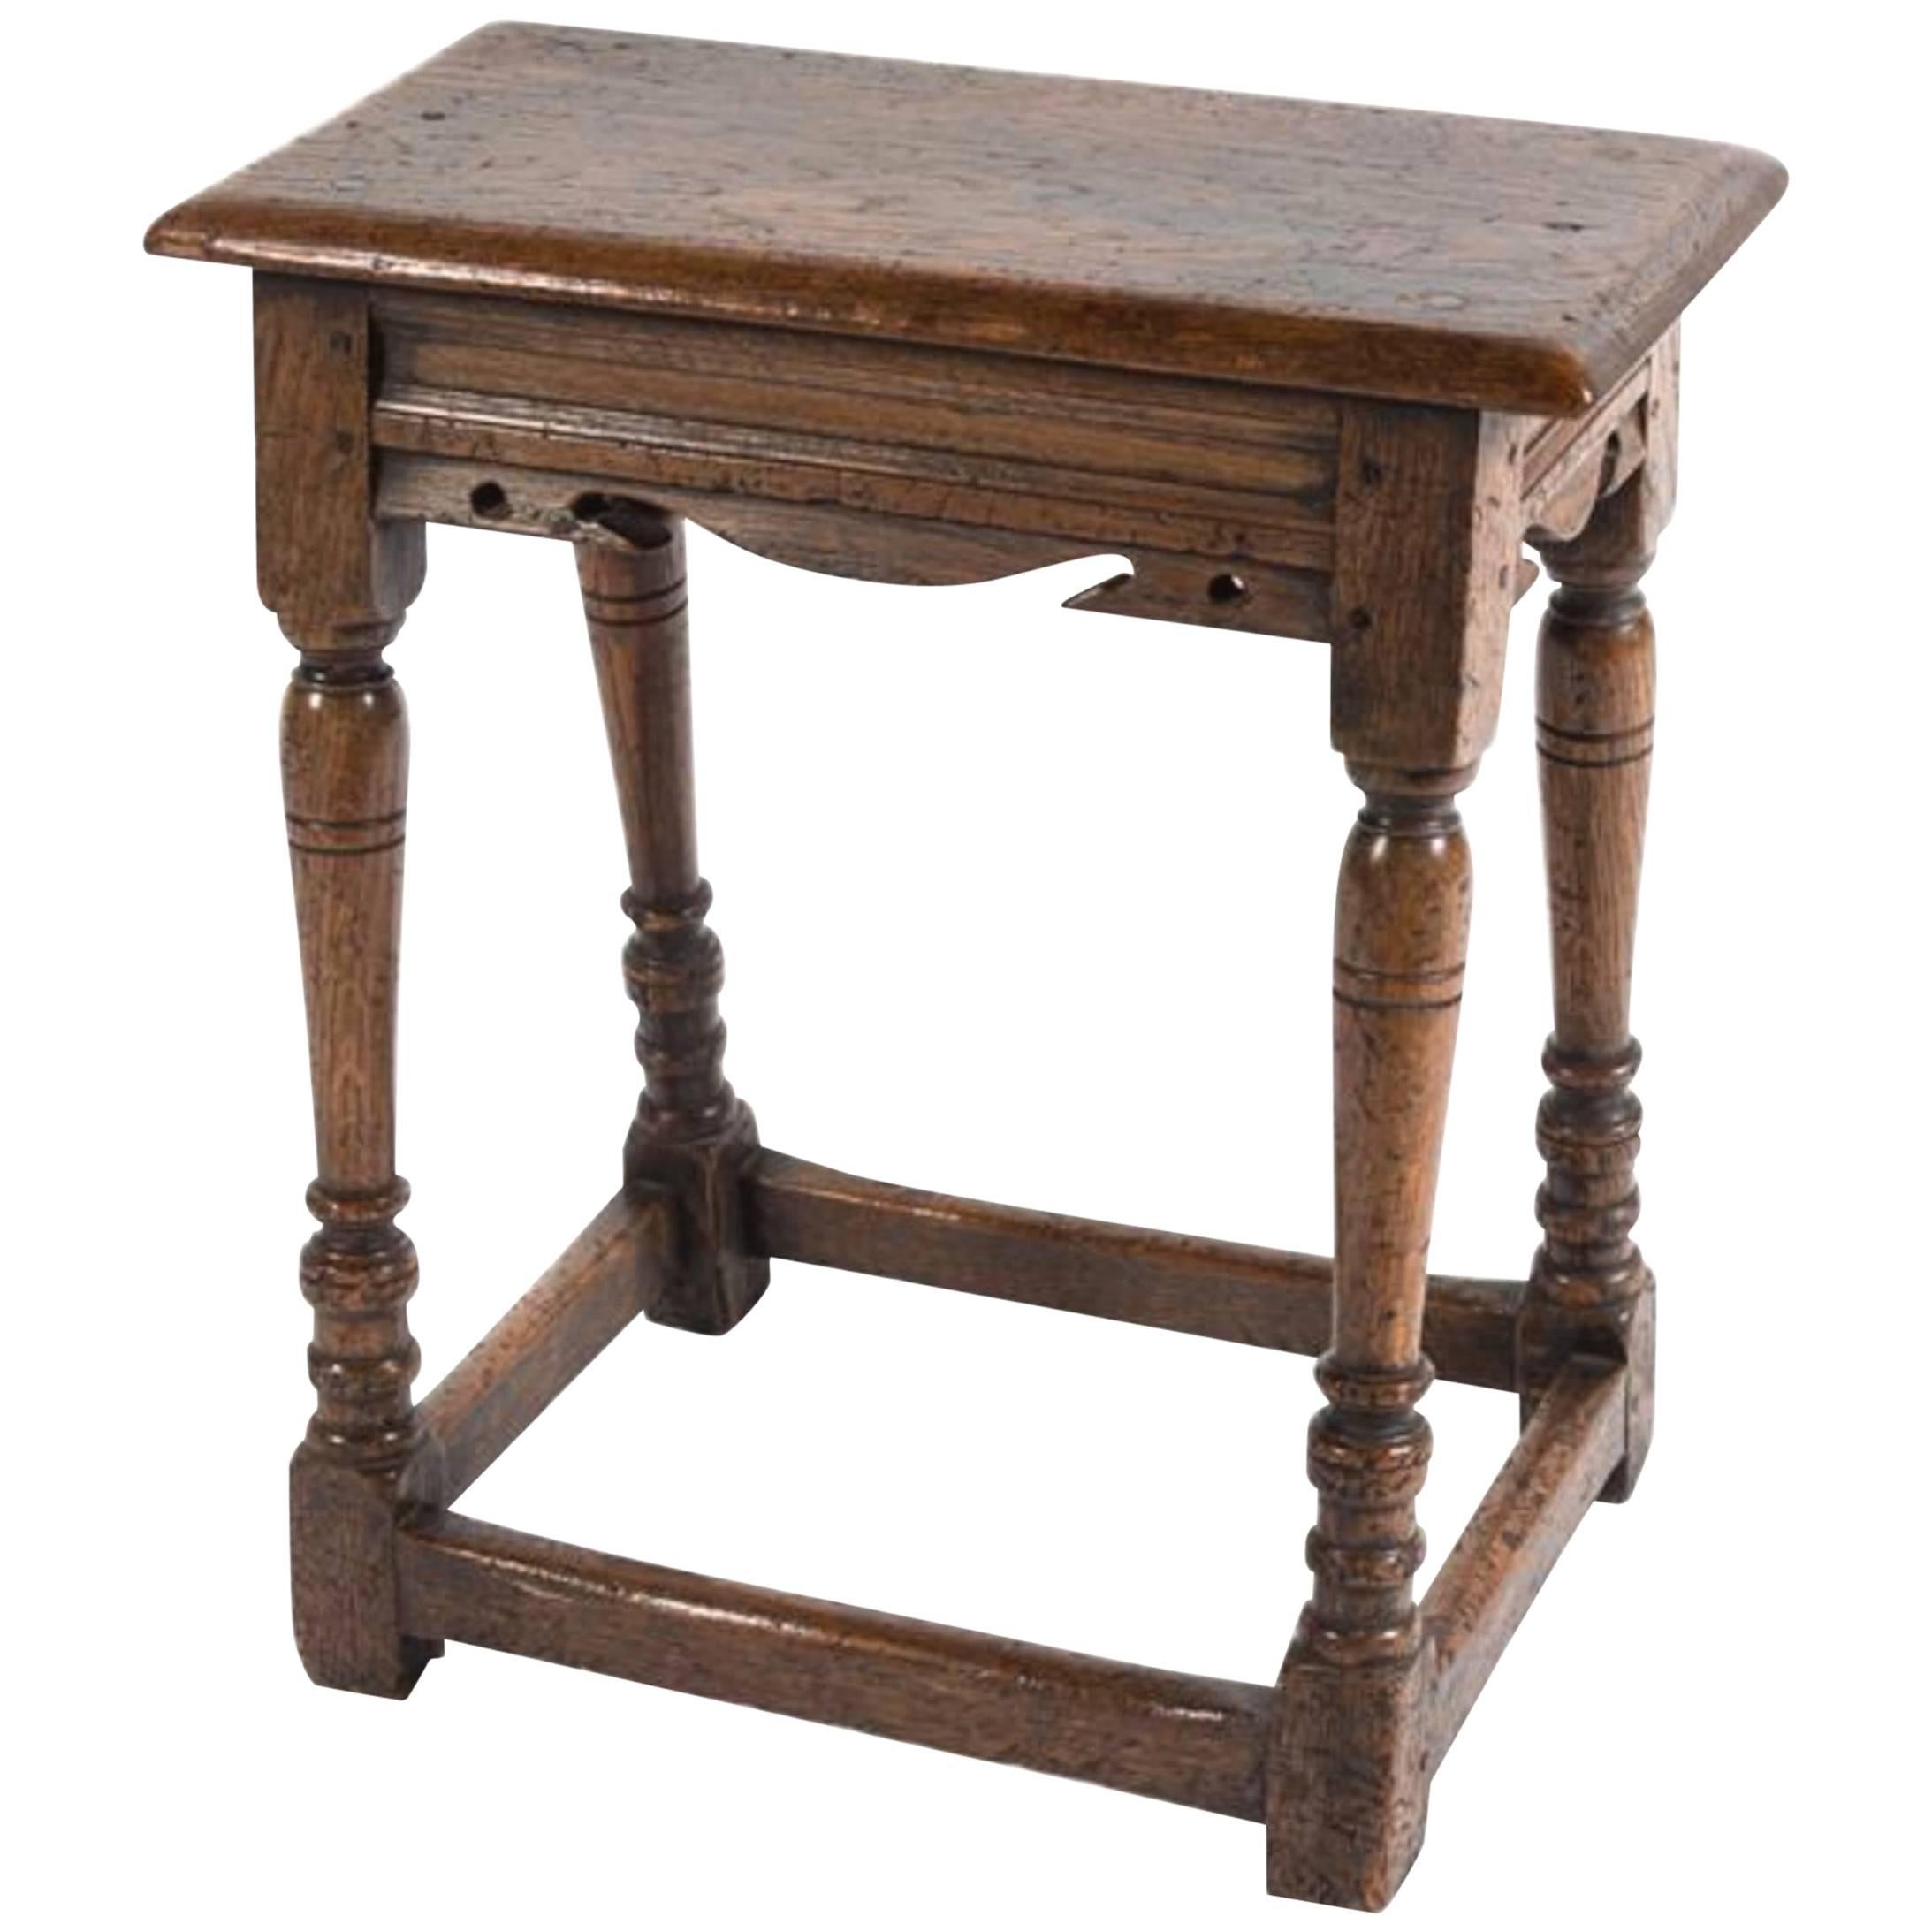 17th Century Style Jacobean English Oak Stool/Drinks Table, Great Color/Patina